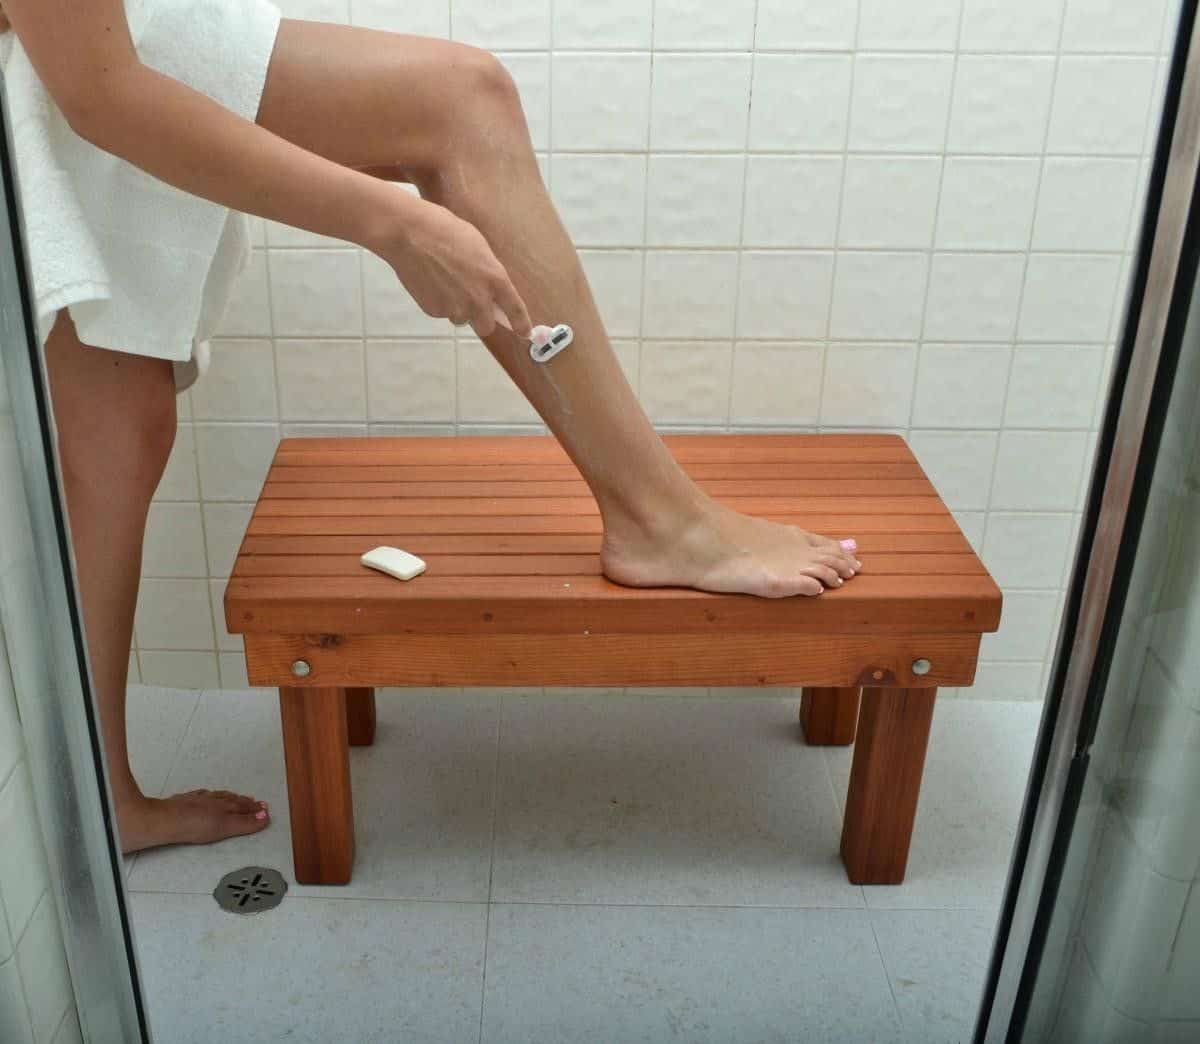 DIY Shower and Bathroom Benches